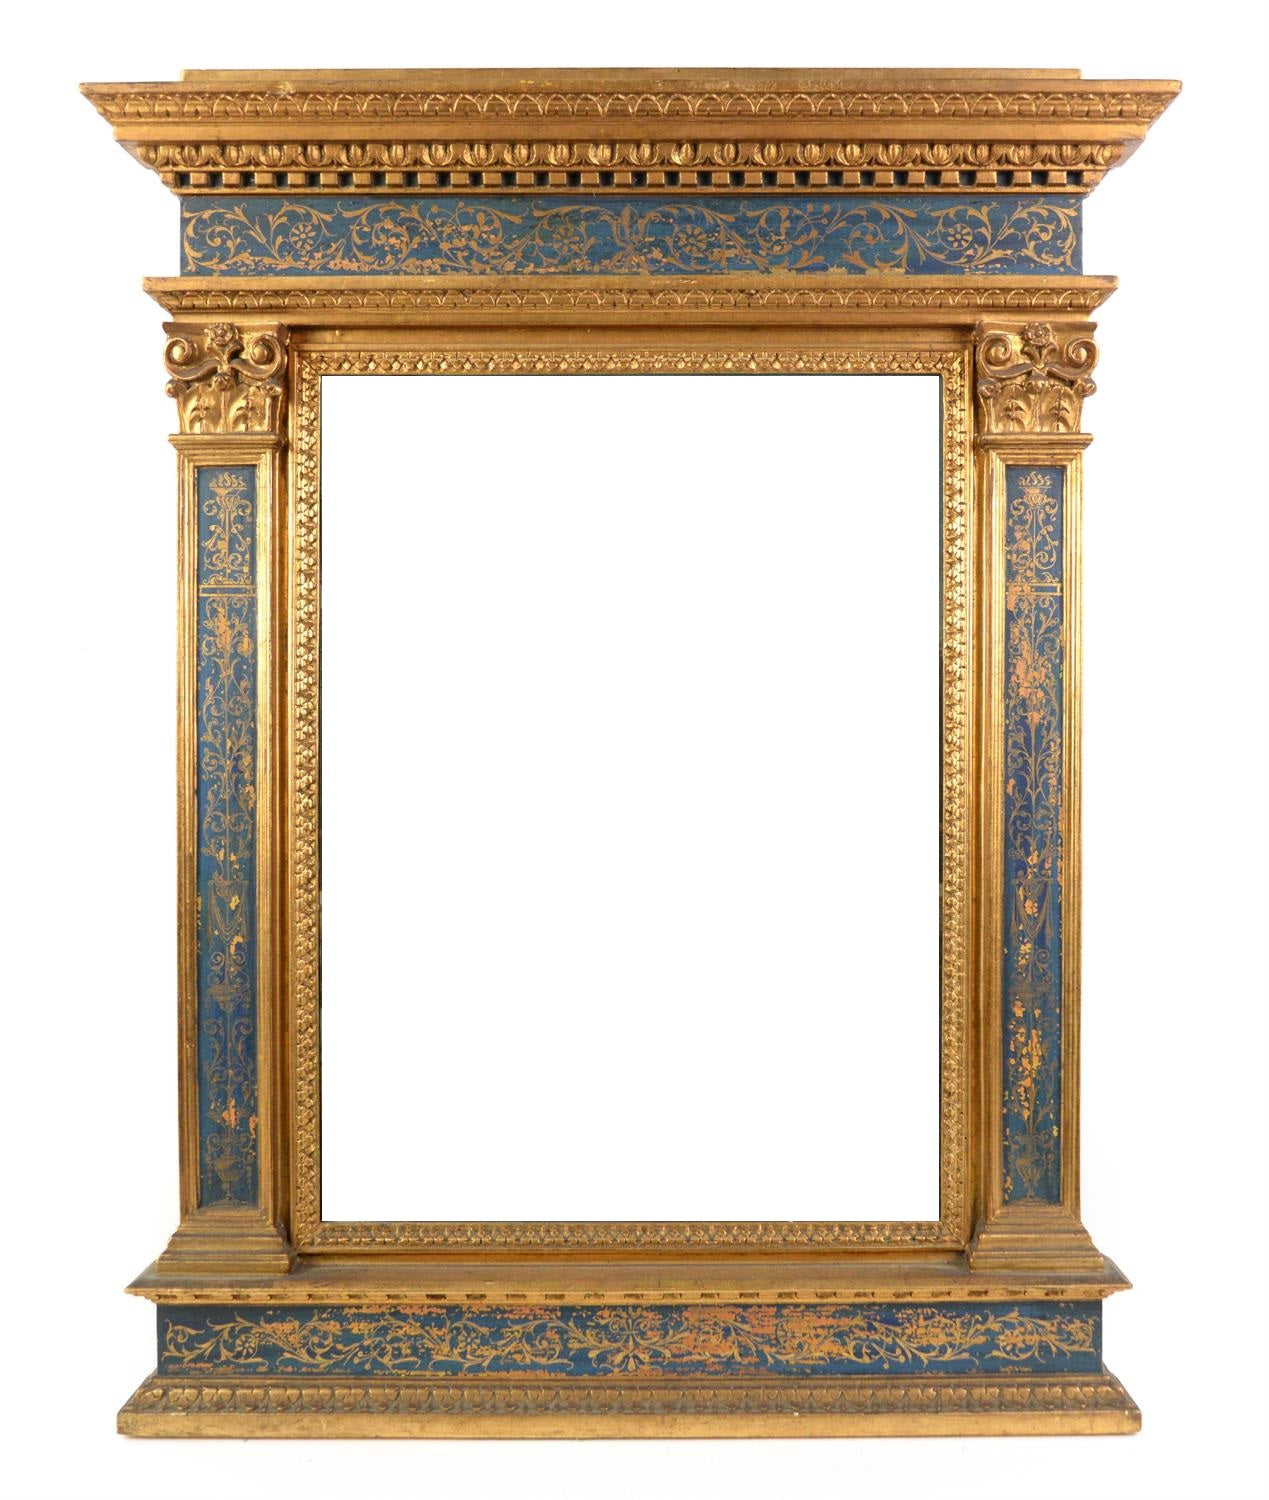 ANTIQUE 19TH CENTURY TABERNACLE PICTURE FRAME